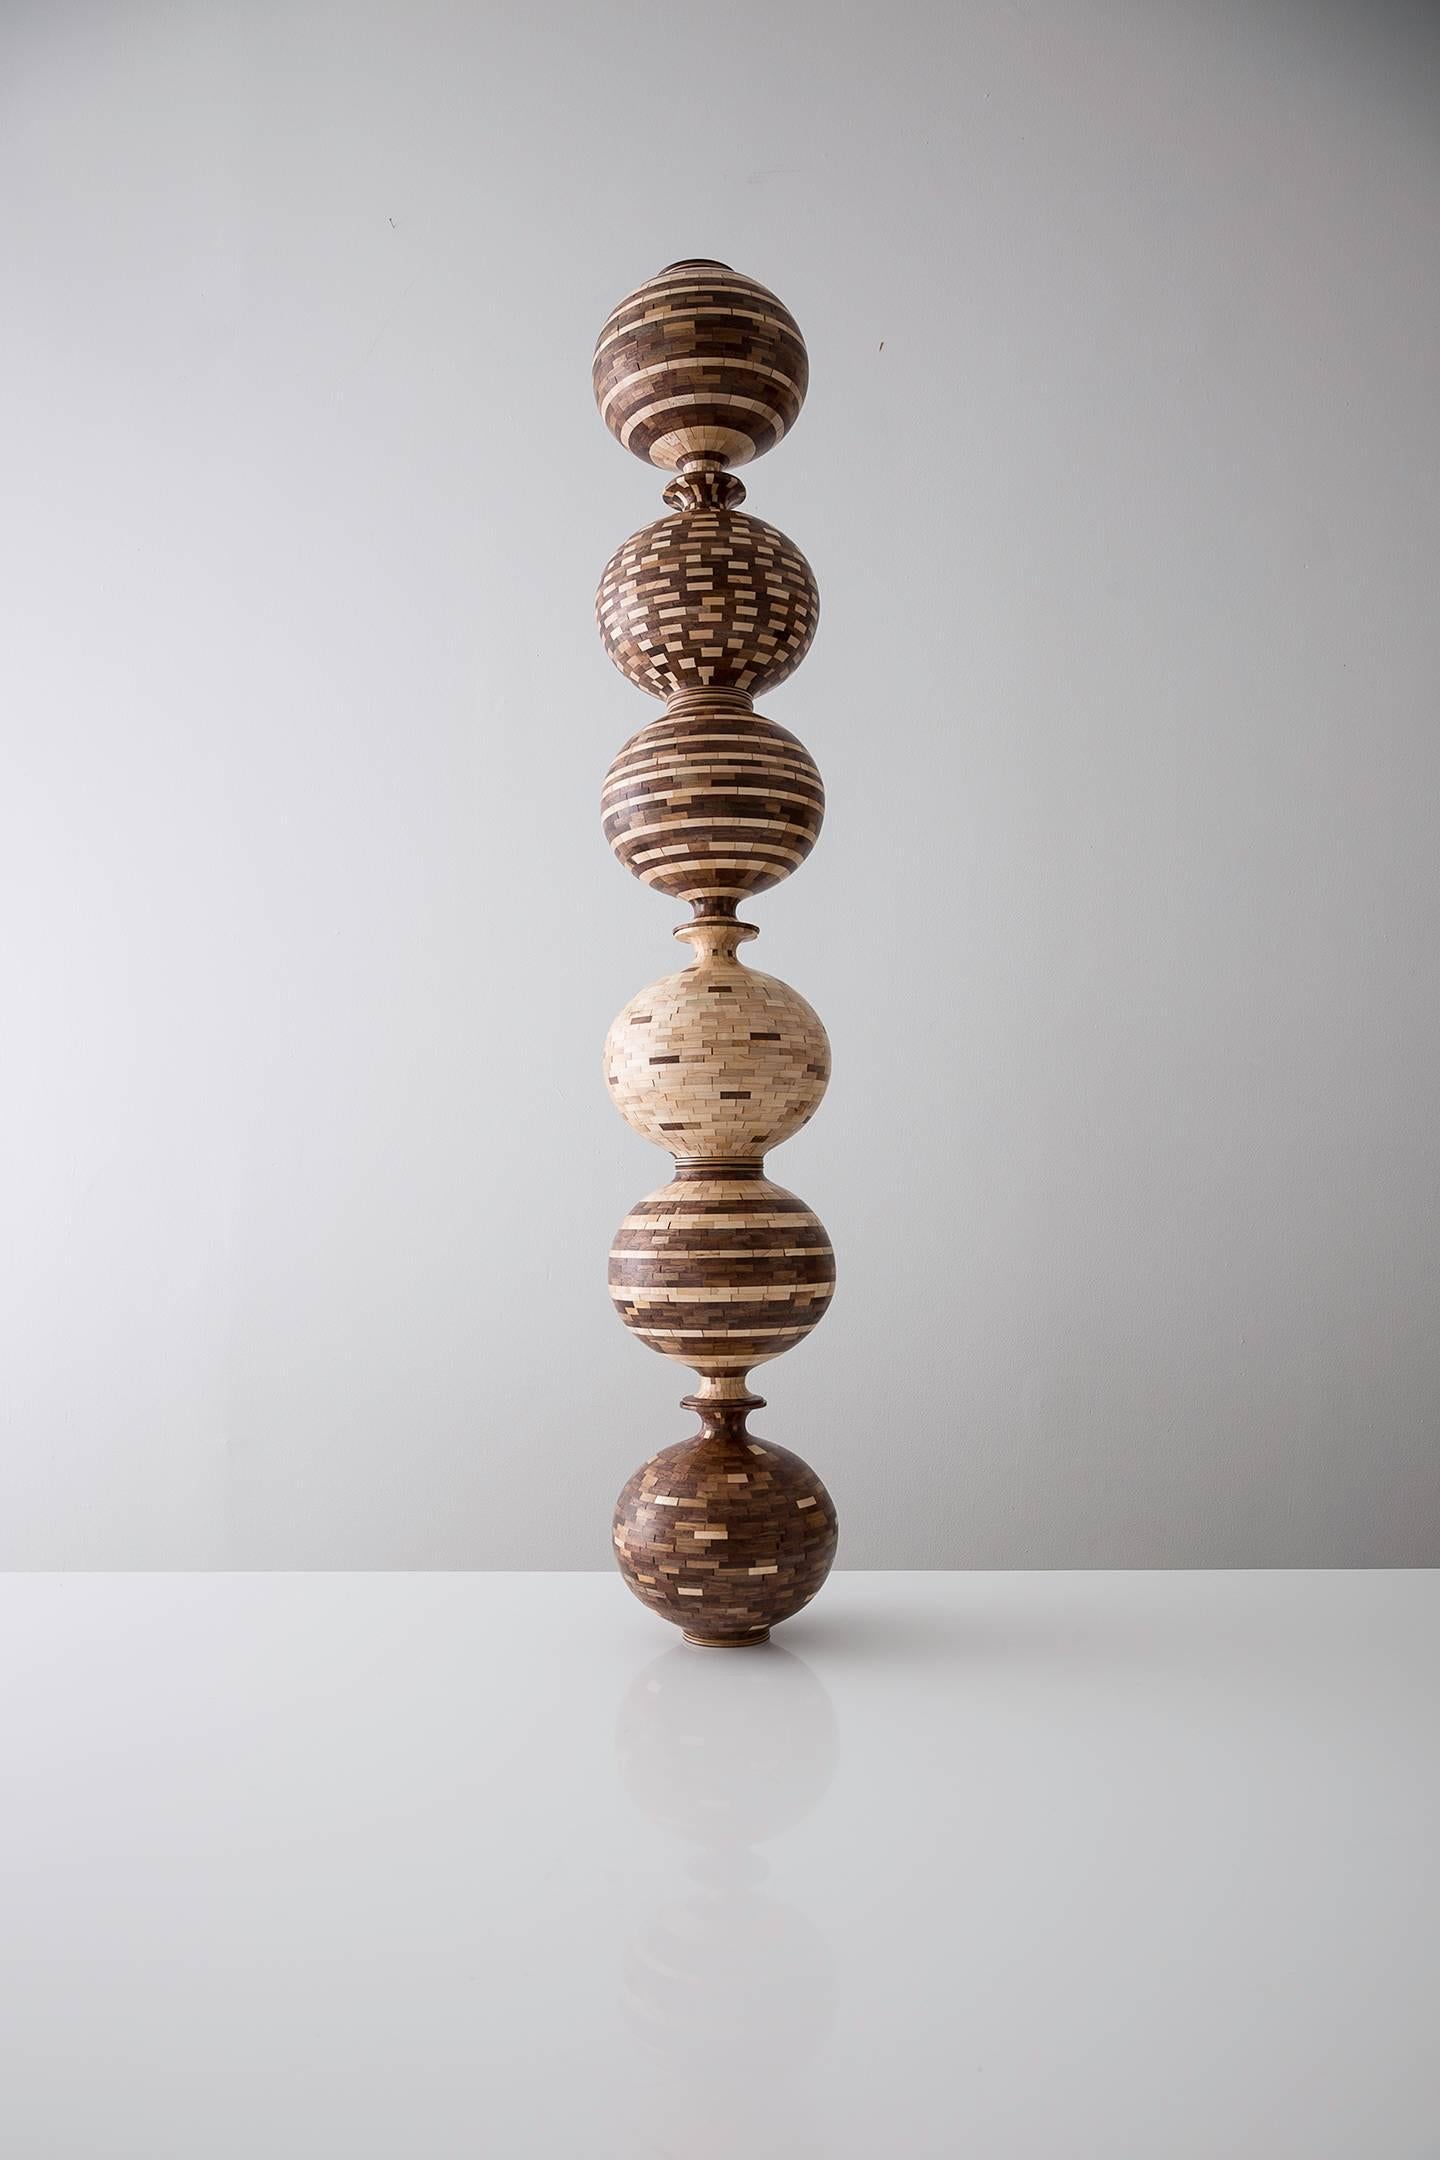 American STACKED Walnut and Maple Striped Vase by Richard Haining, Available Now